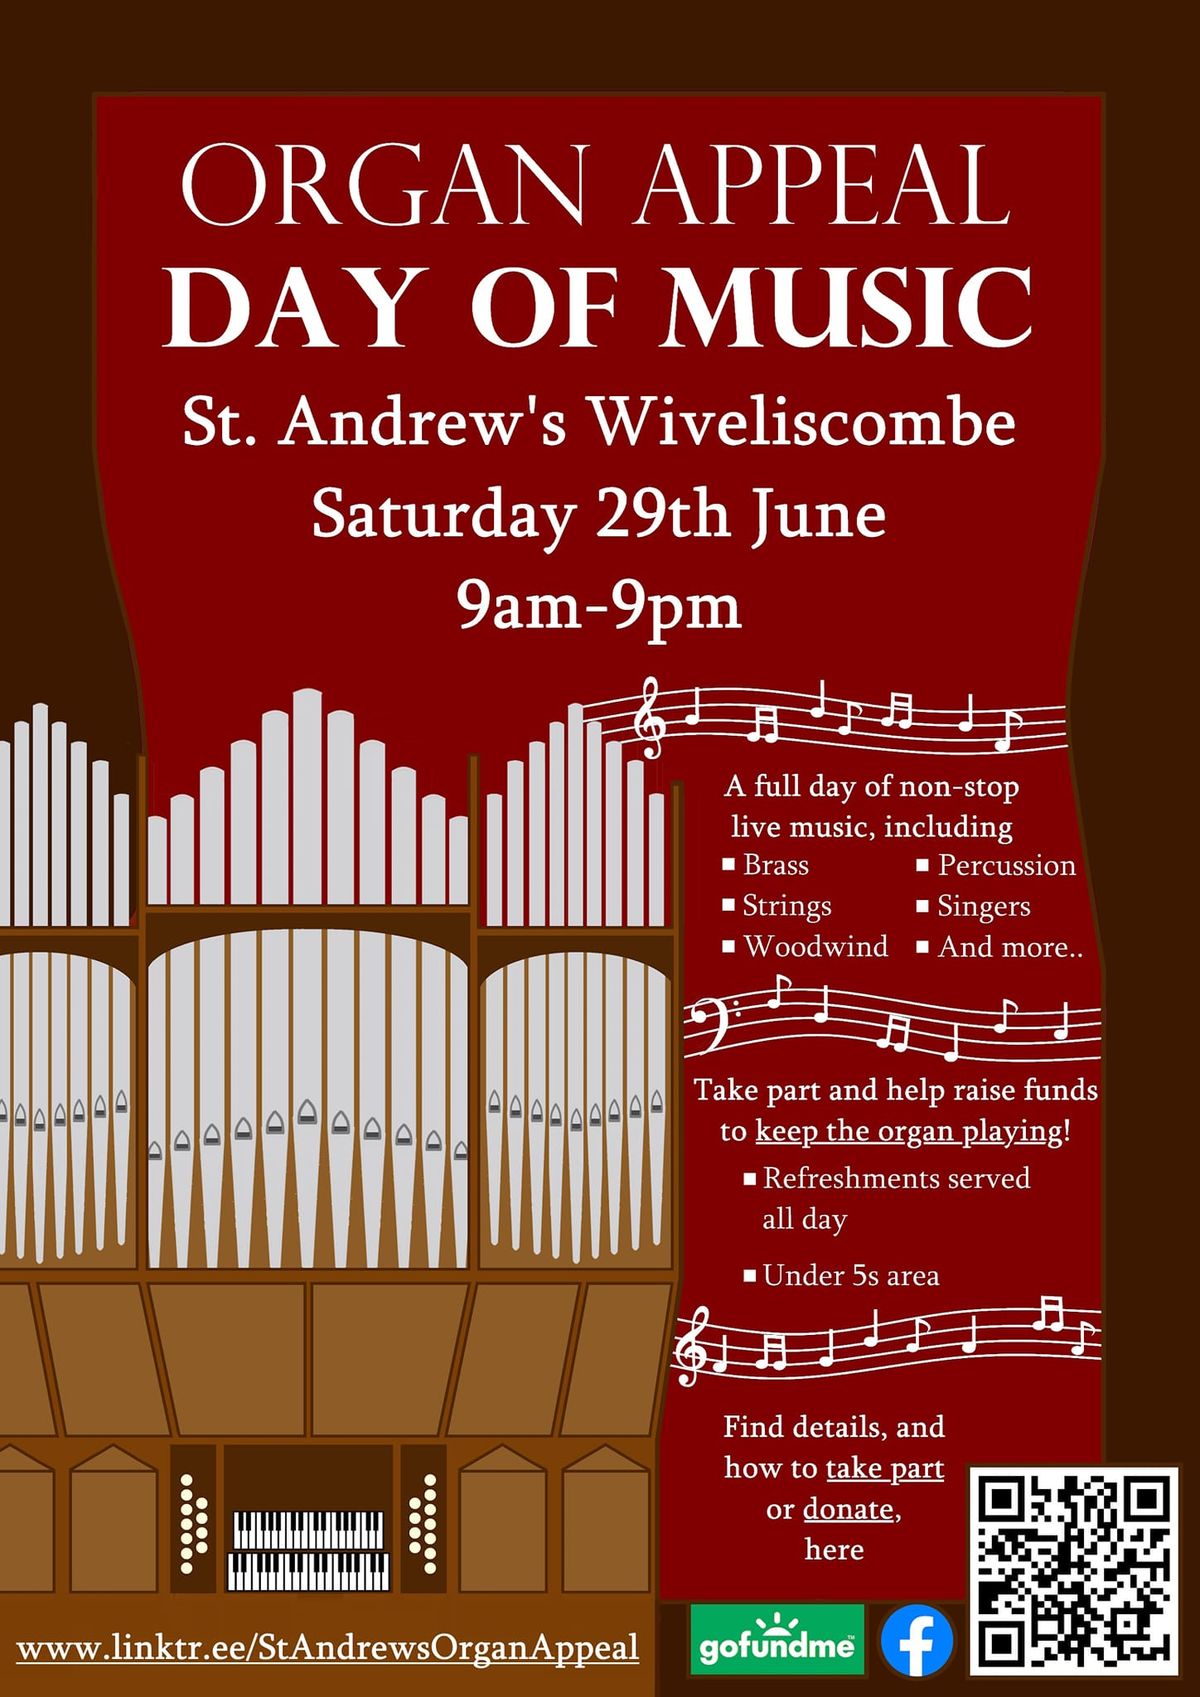 St. Andrew's Organ Appeal Day of Music